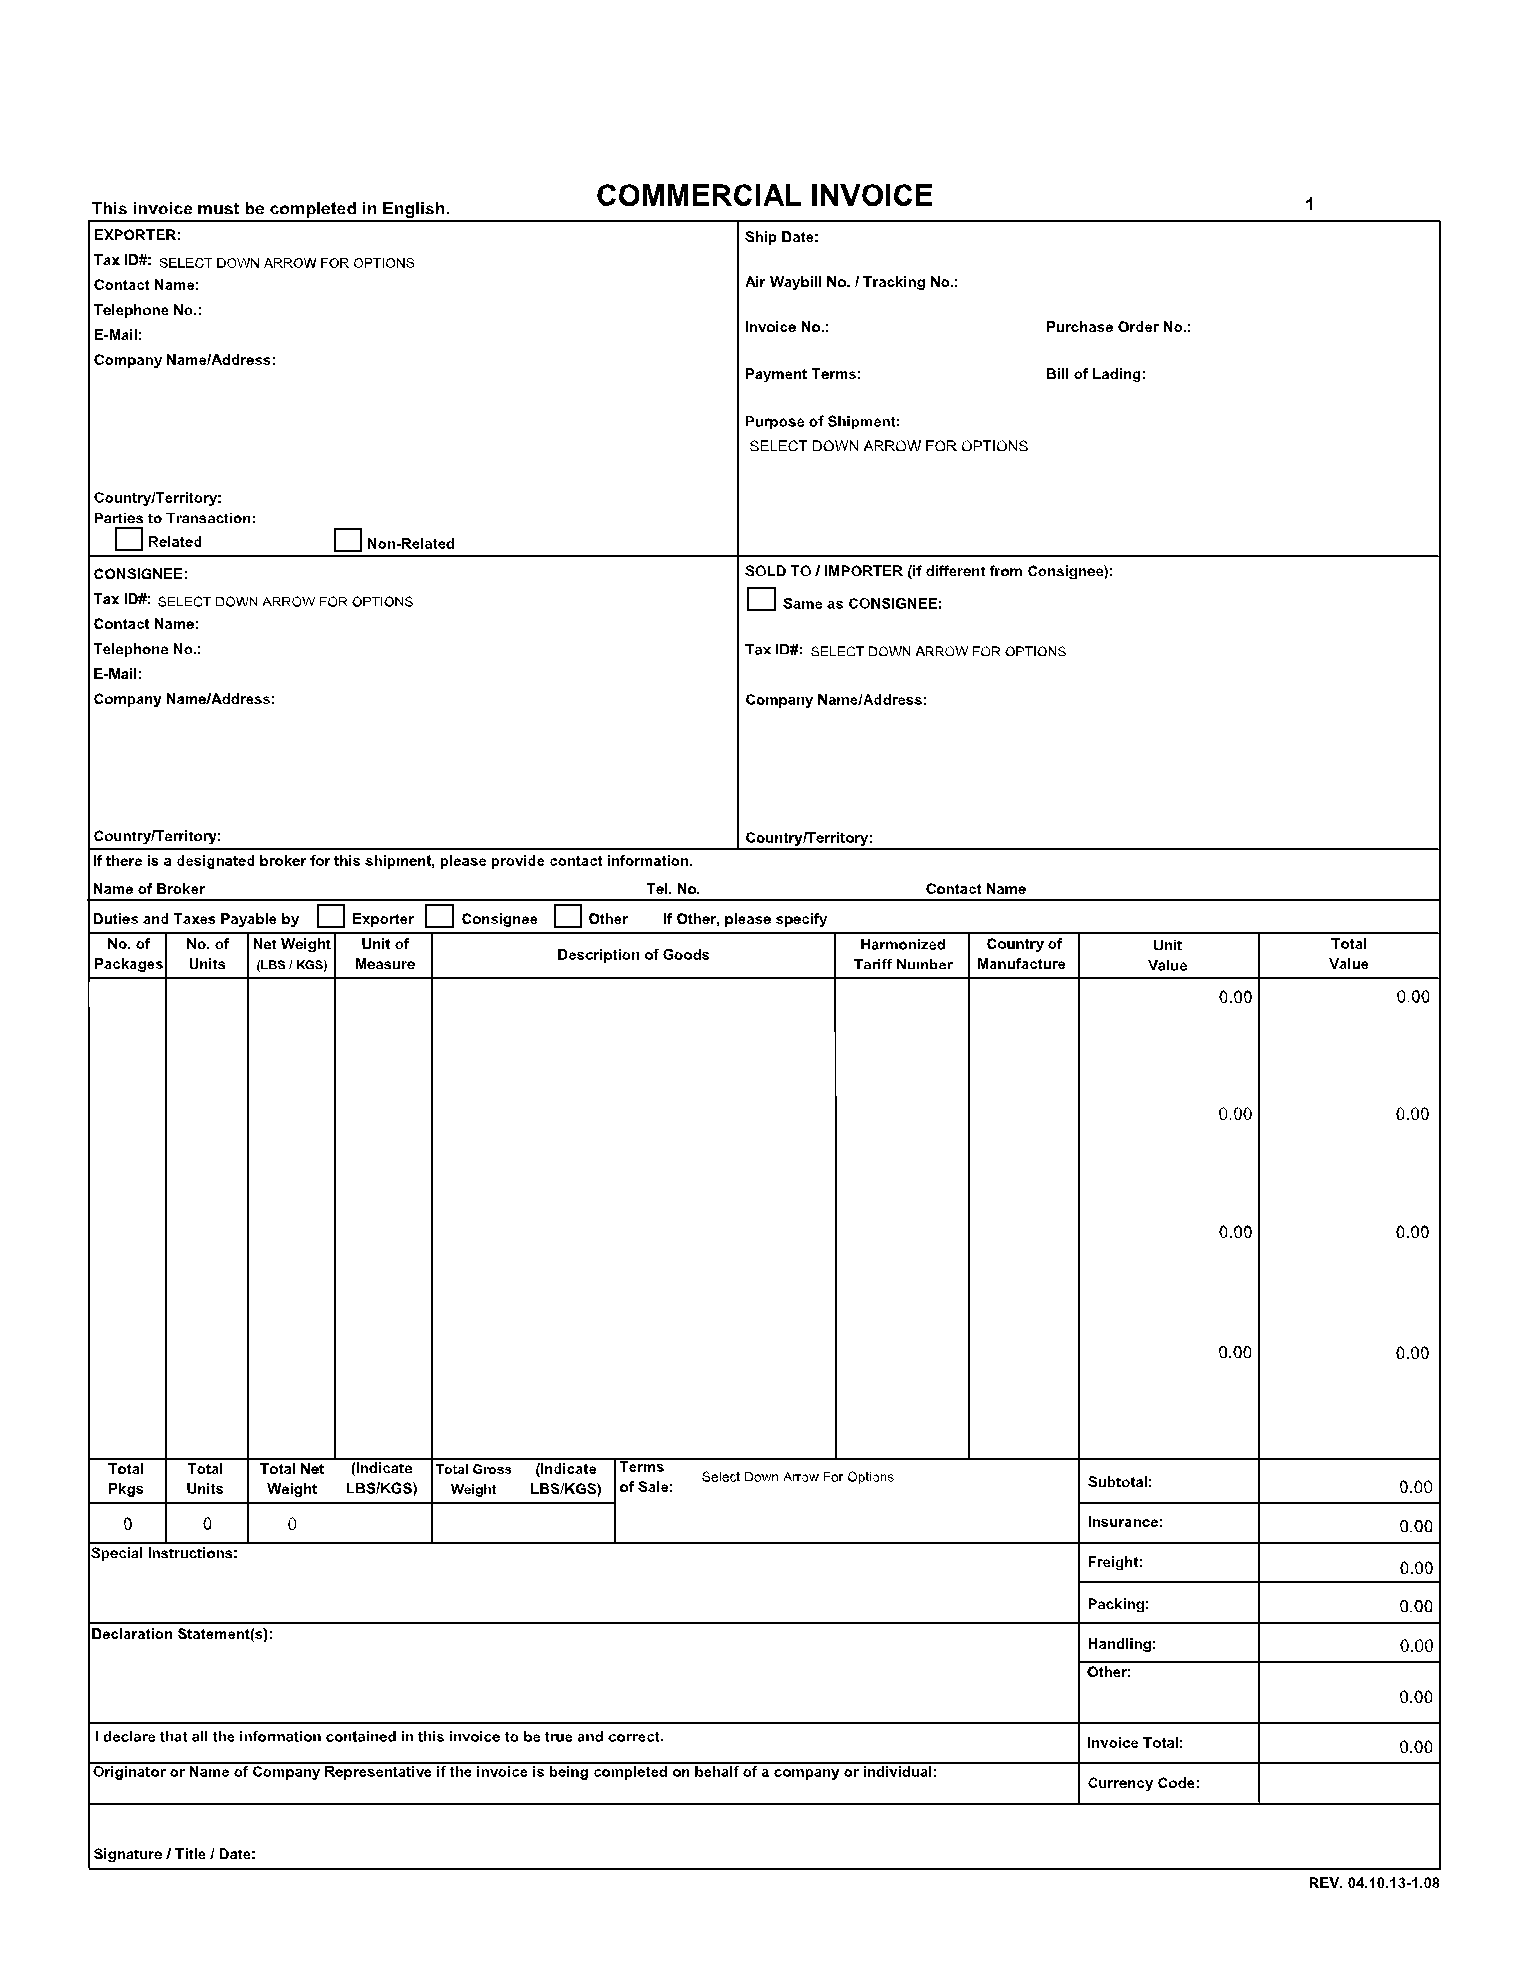 FedEx Commercial Invoice Template 1